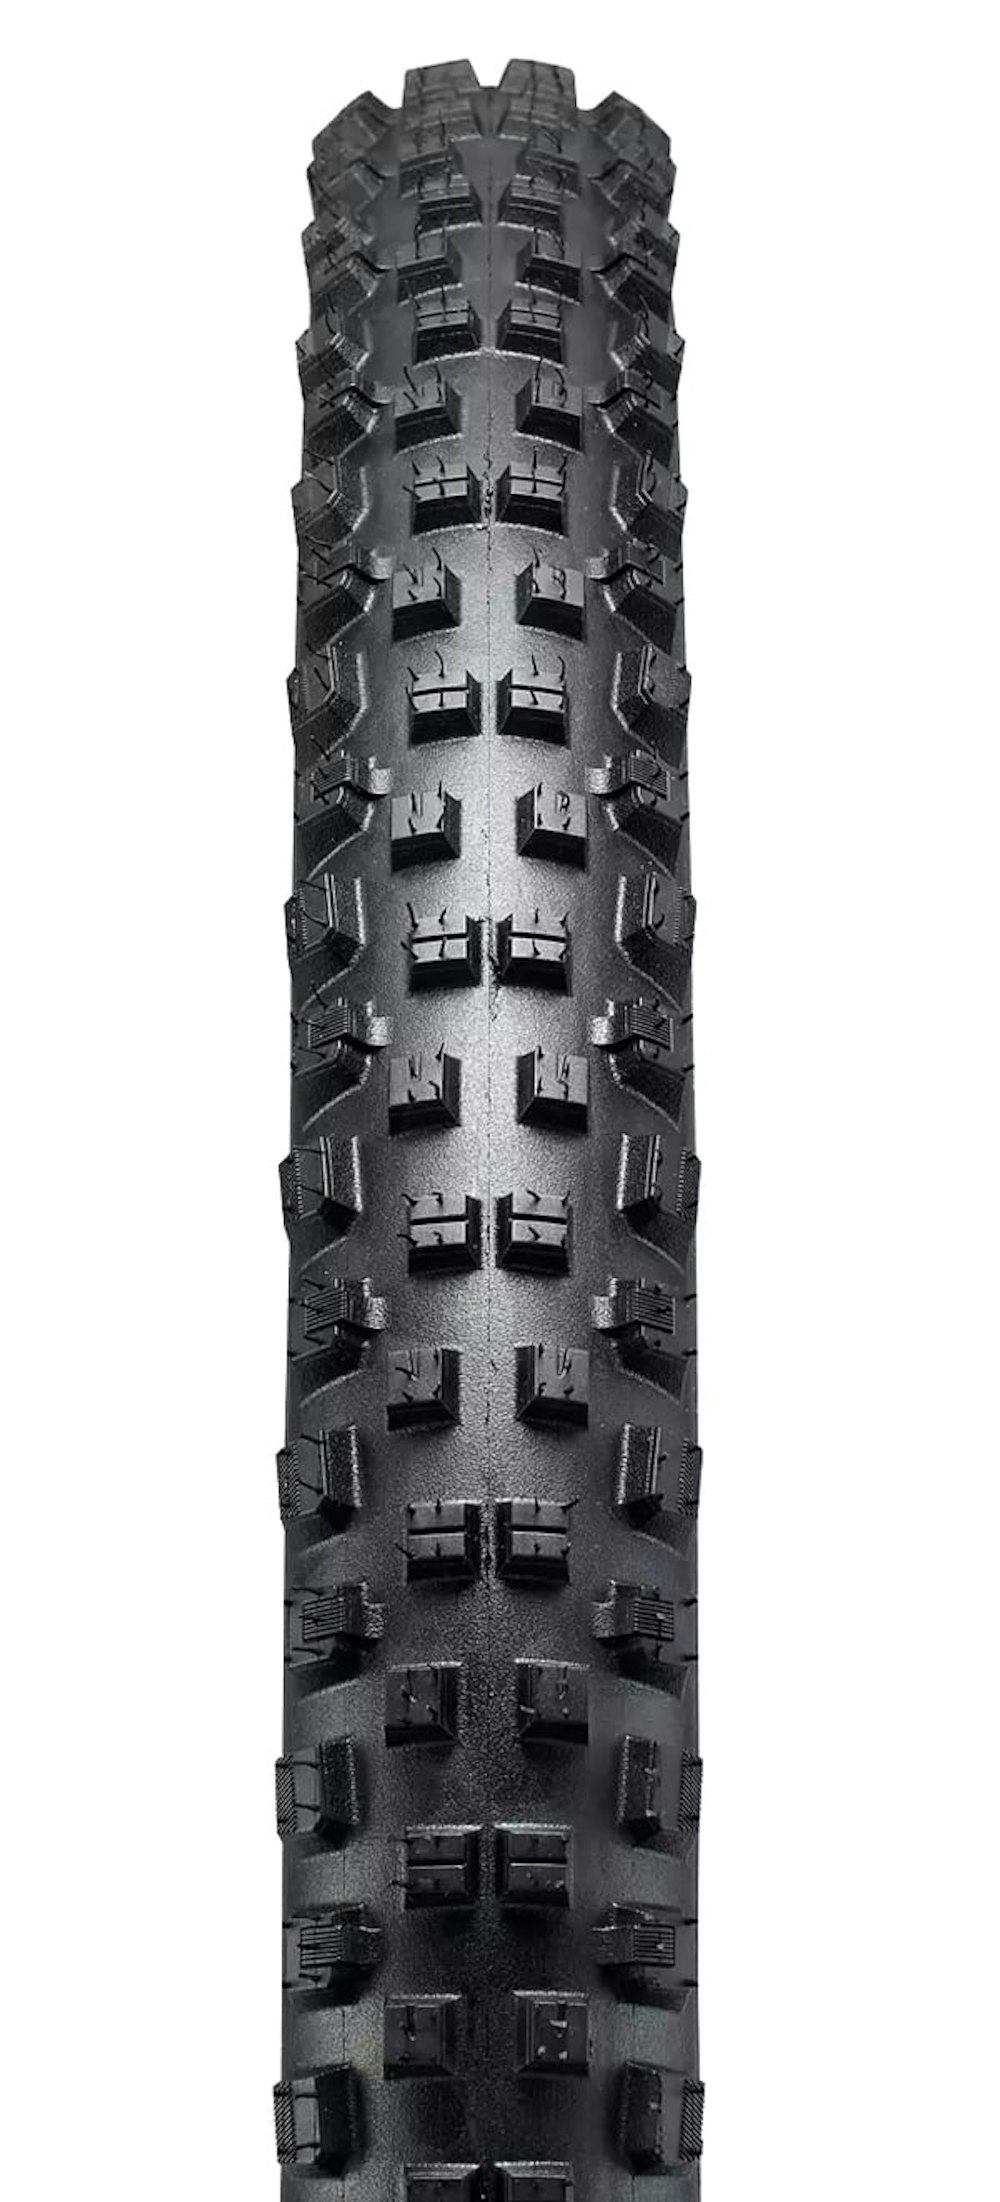 Specialized Hillbilly Grid Trail 2BR T9 29" Tire